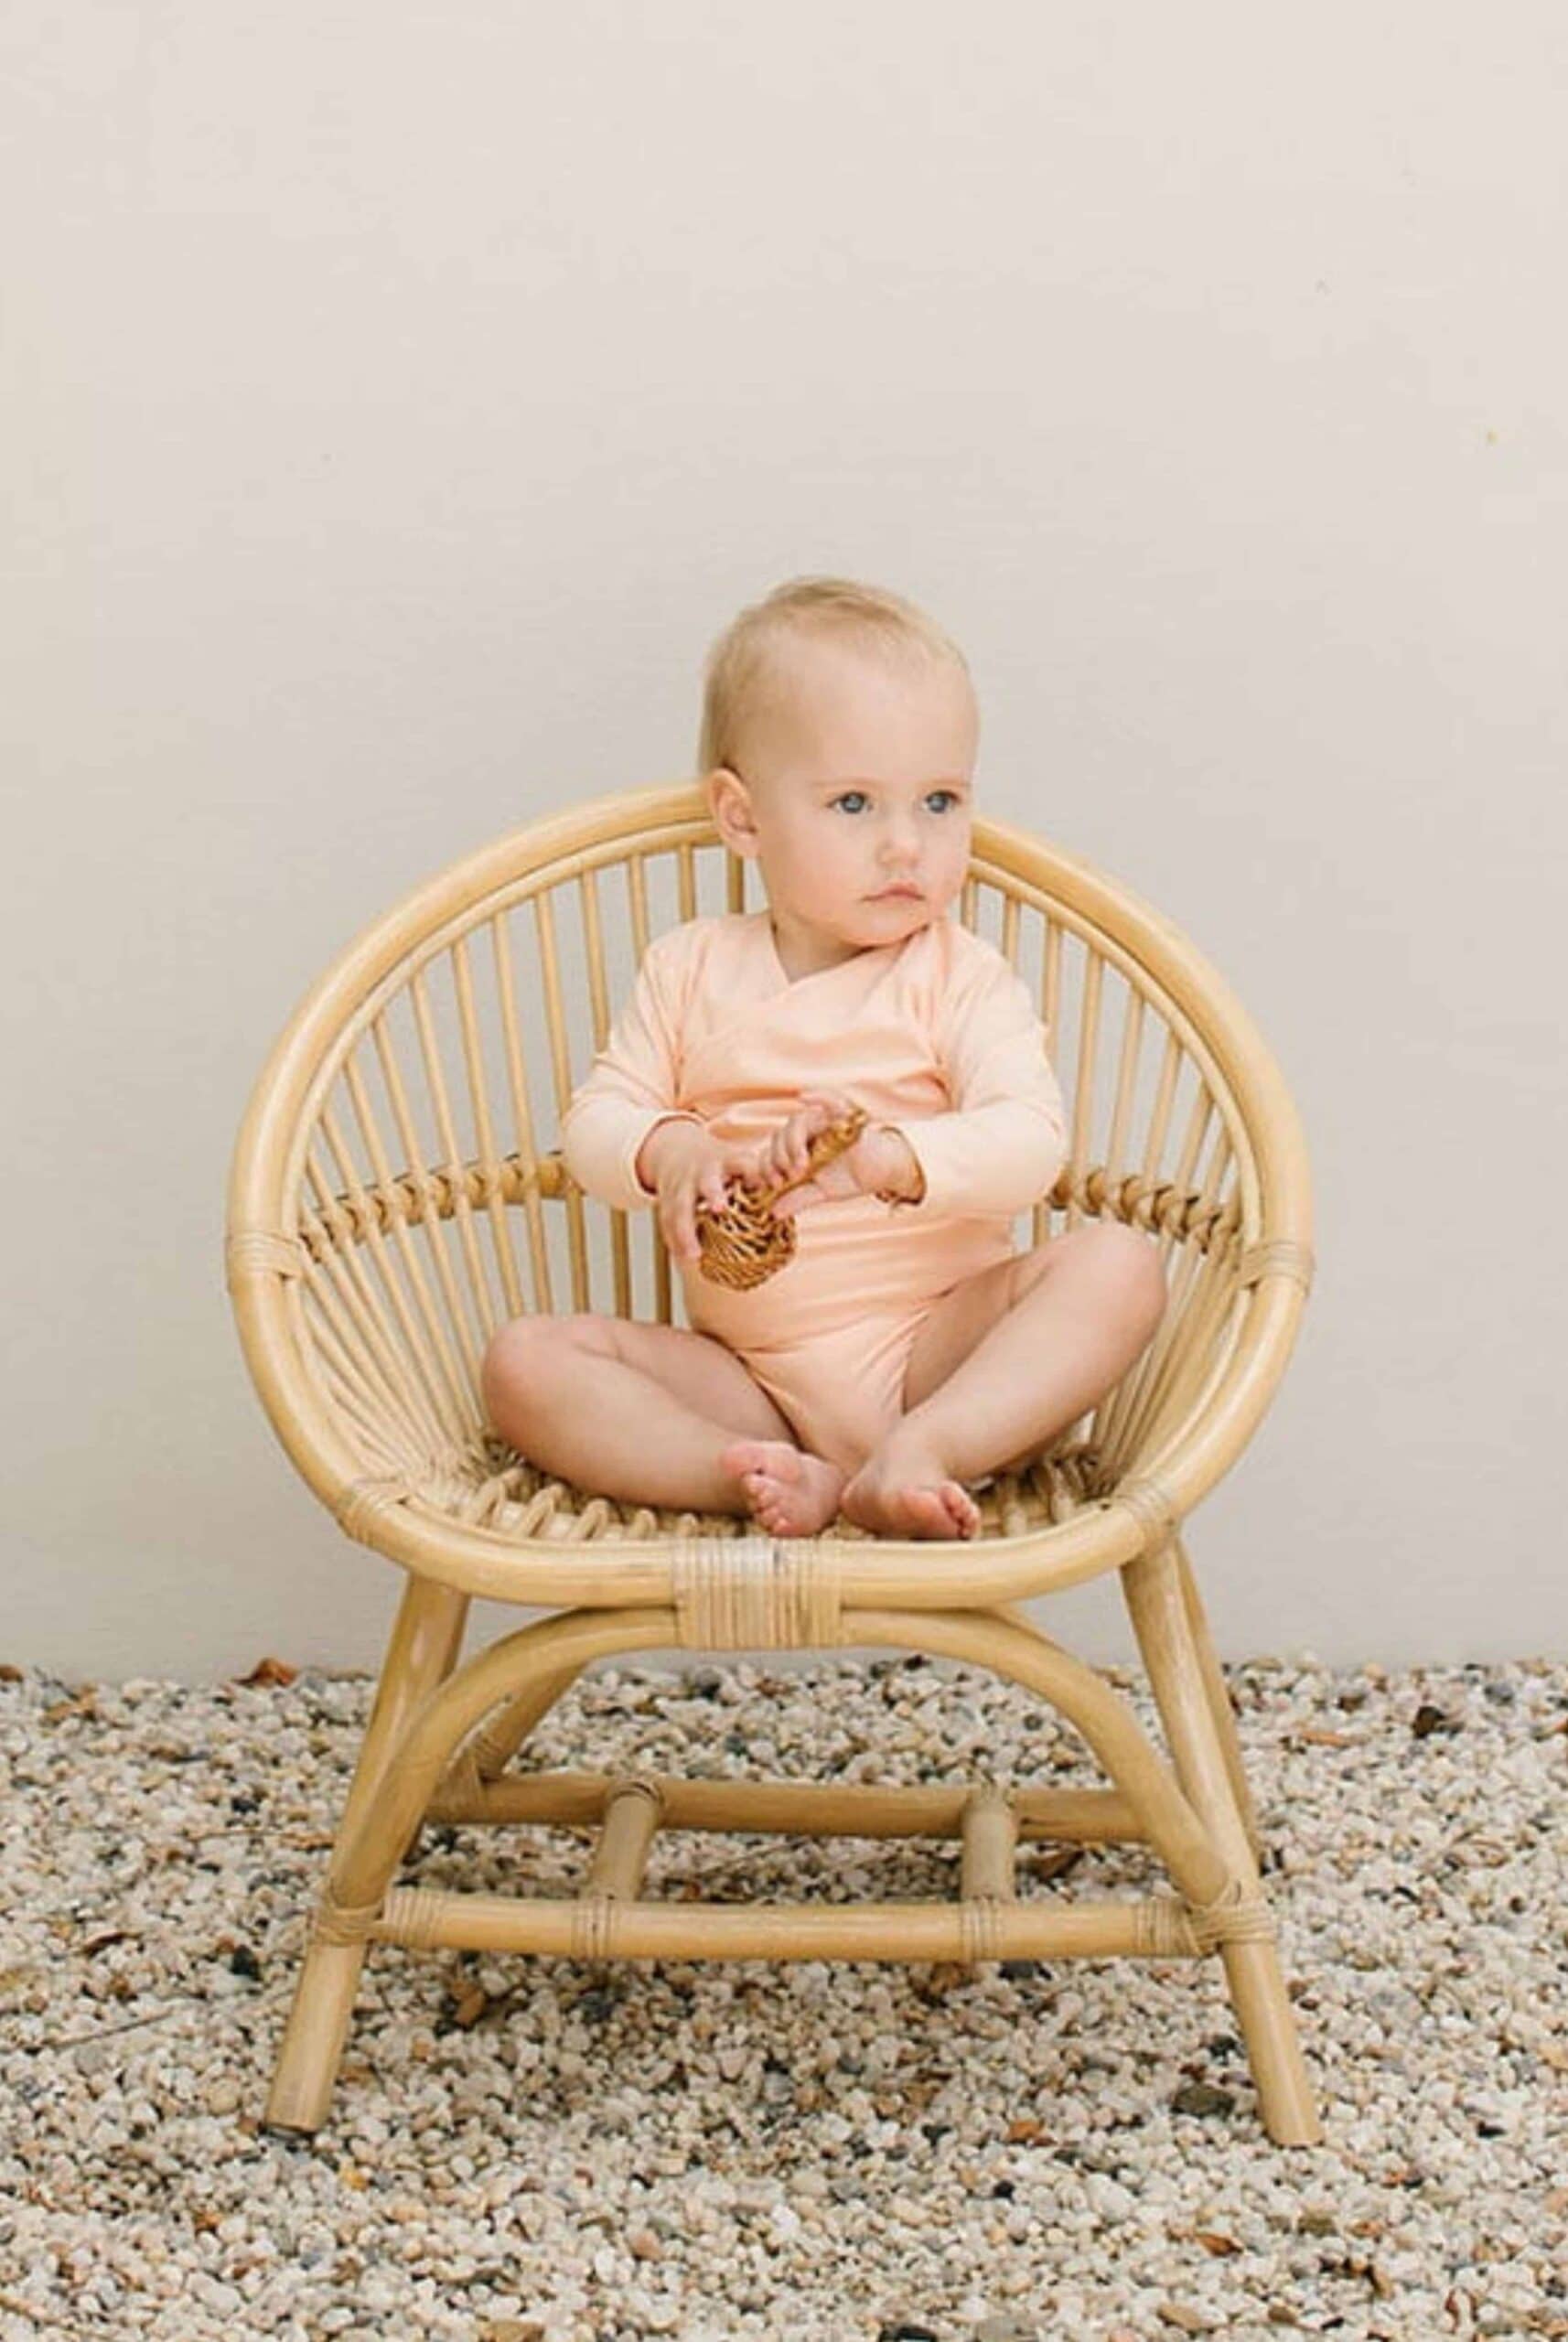 A baby sitting in a rattan chair.